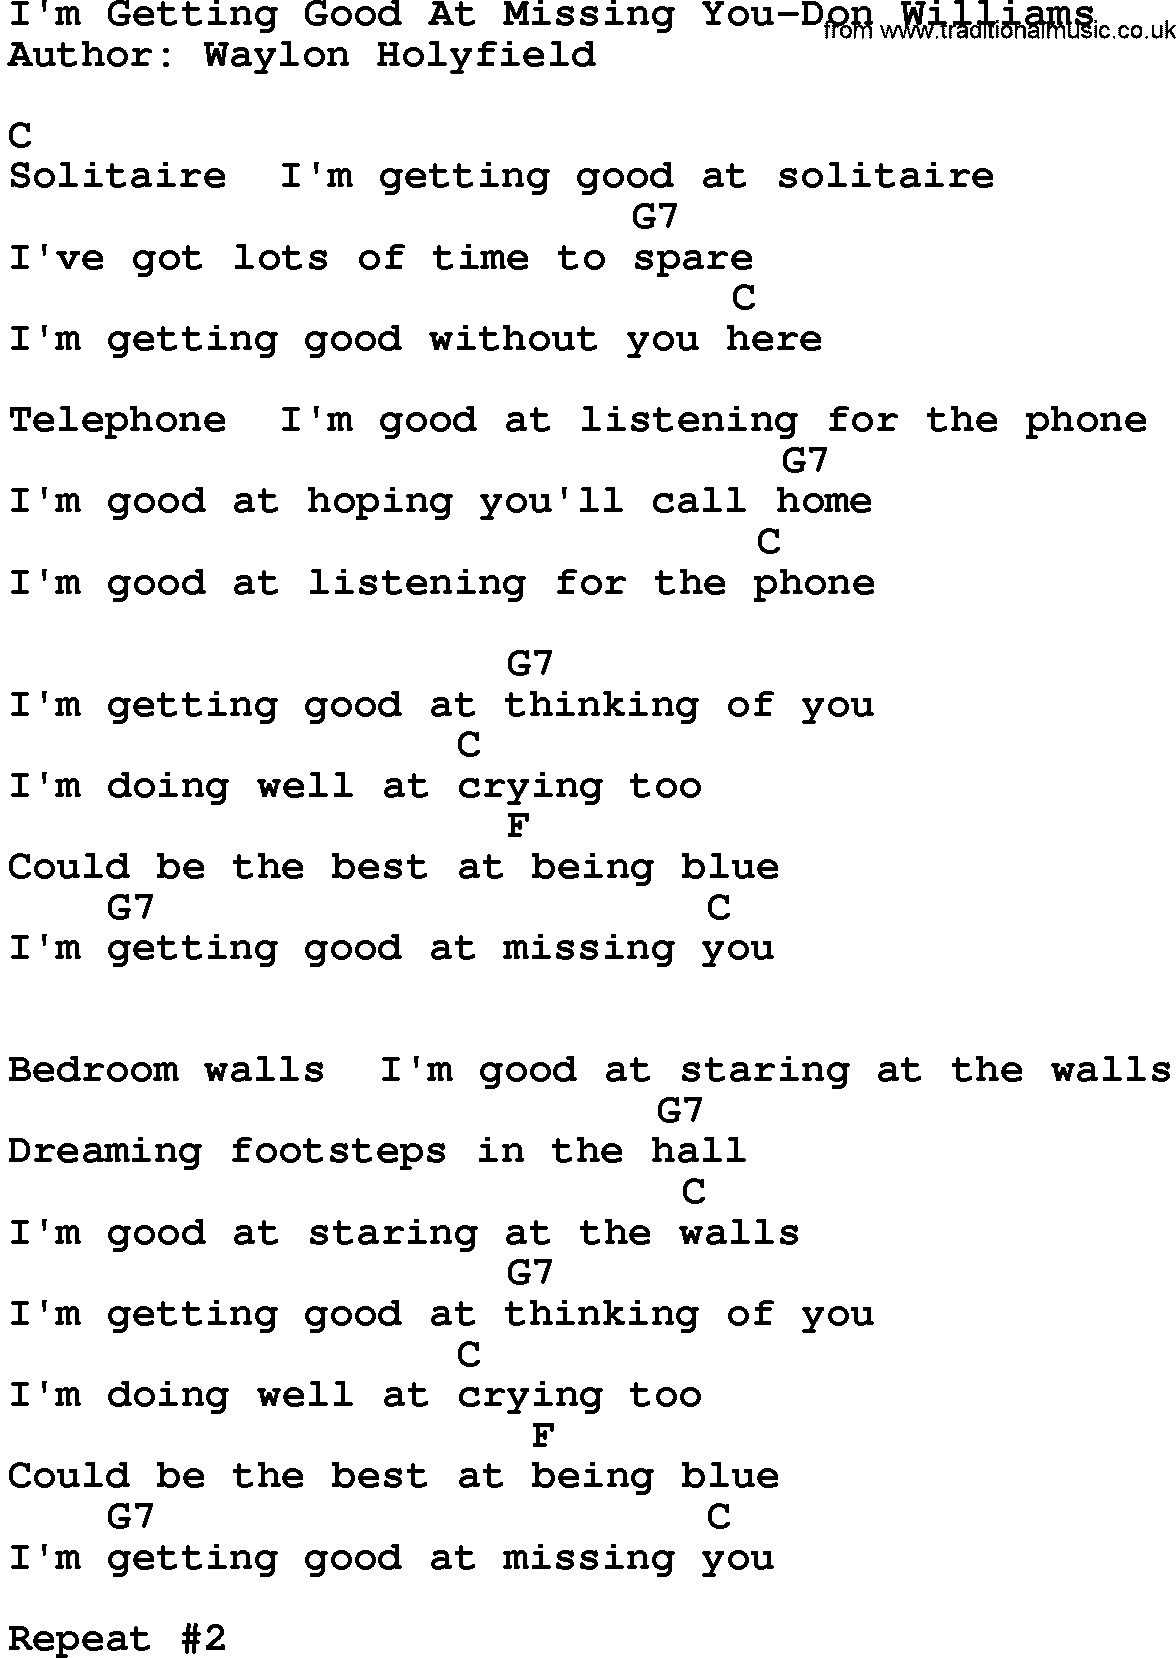 Country music song: I'm Getting Good At Missing You-Don Williams lyrics and chords